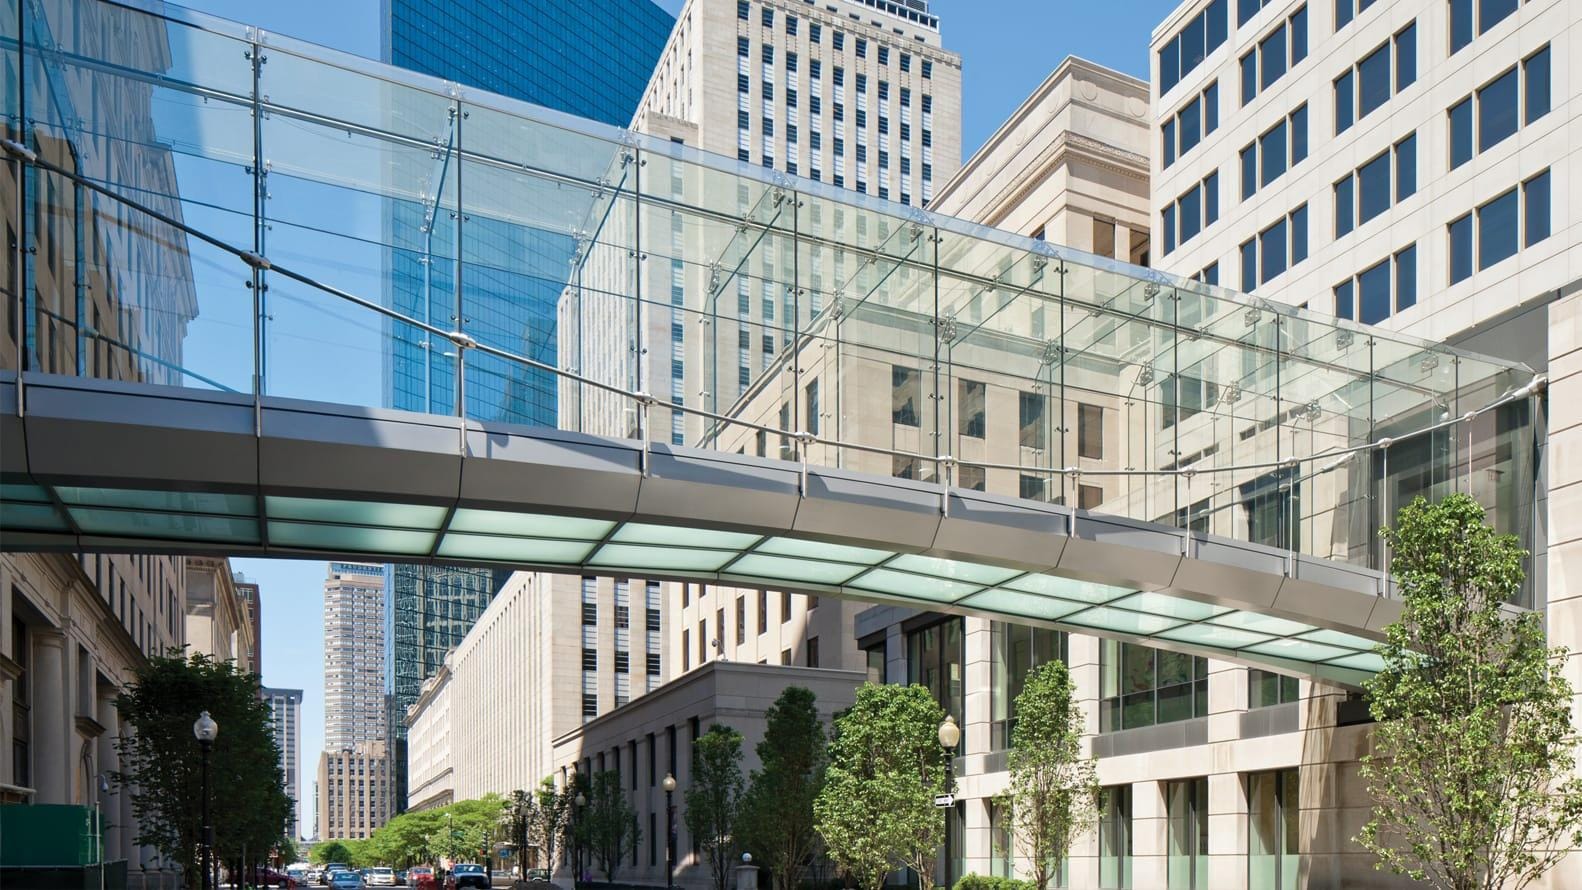 Picture of the Liberty Mutual bridge connecting 175 Berkeley st. office building with 157 Berkeley st. office building